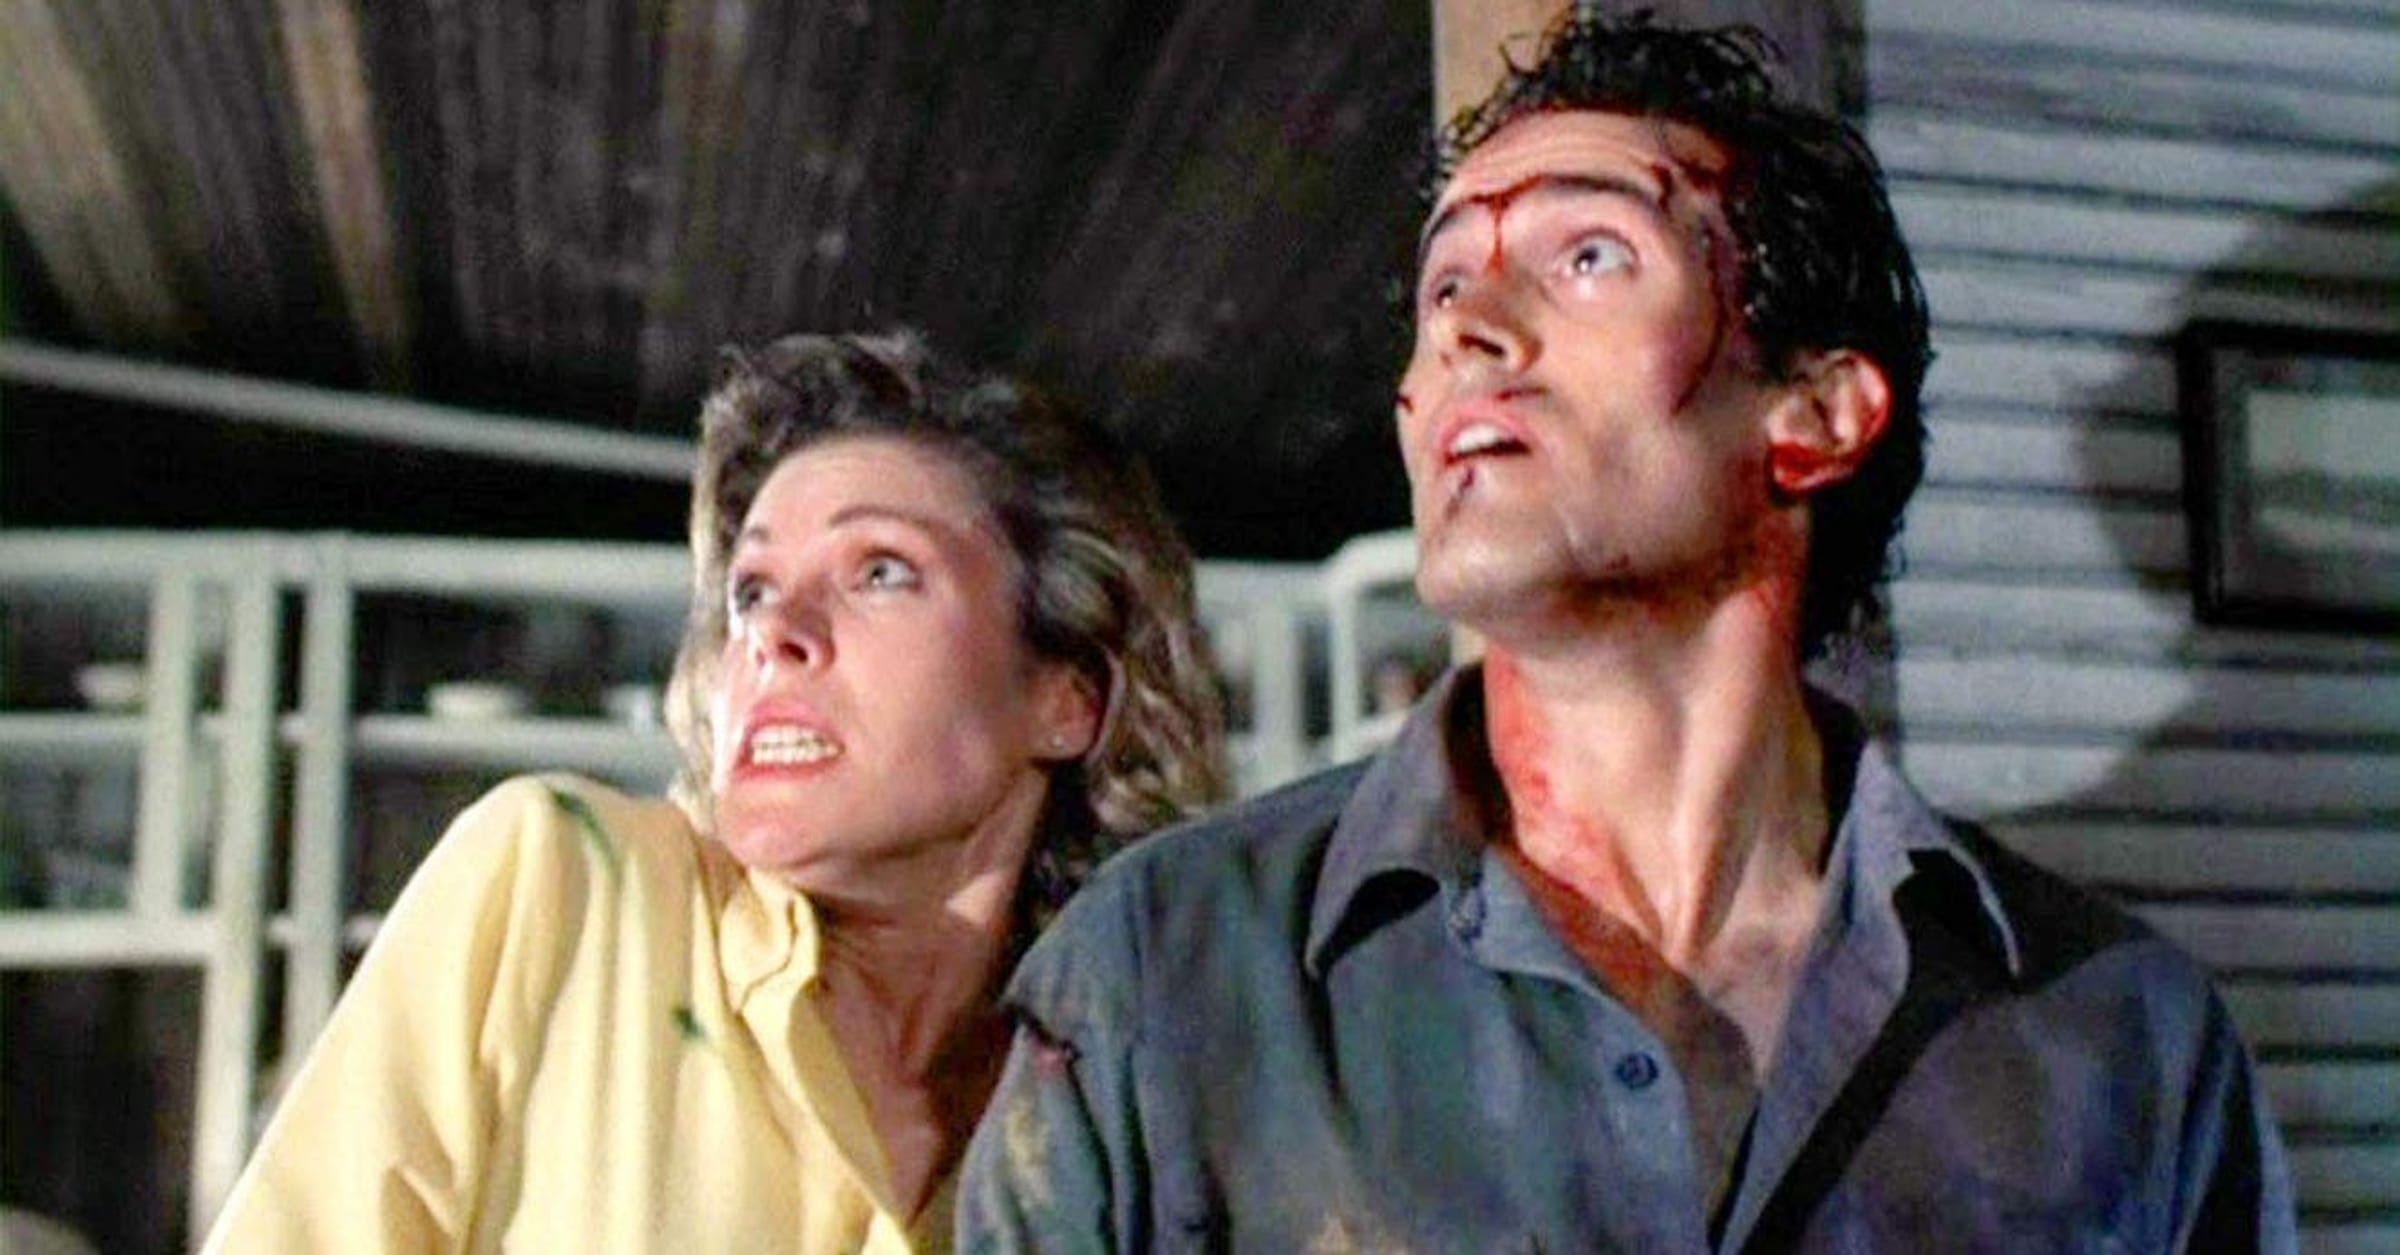 All of the Evil Dead Movies and Series, Ranked According to Rotten Tomatoes